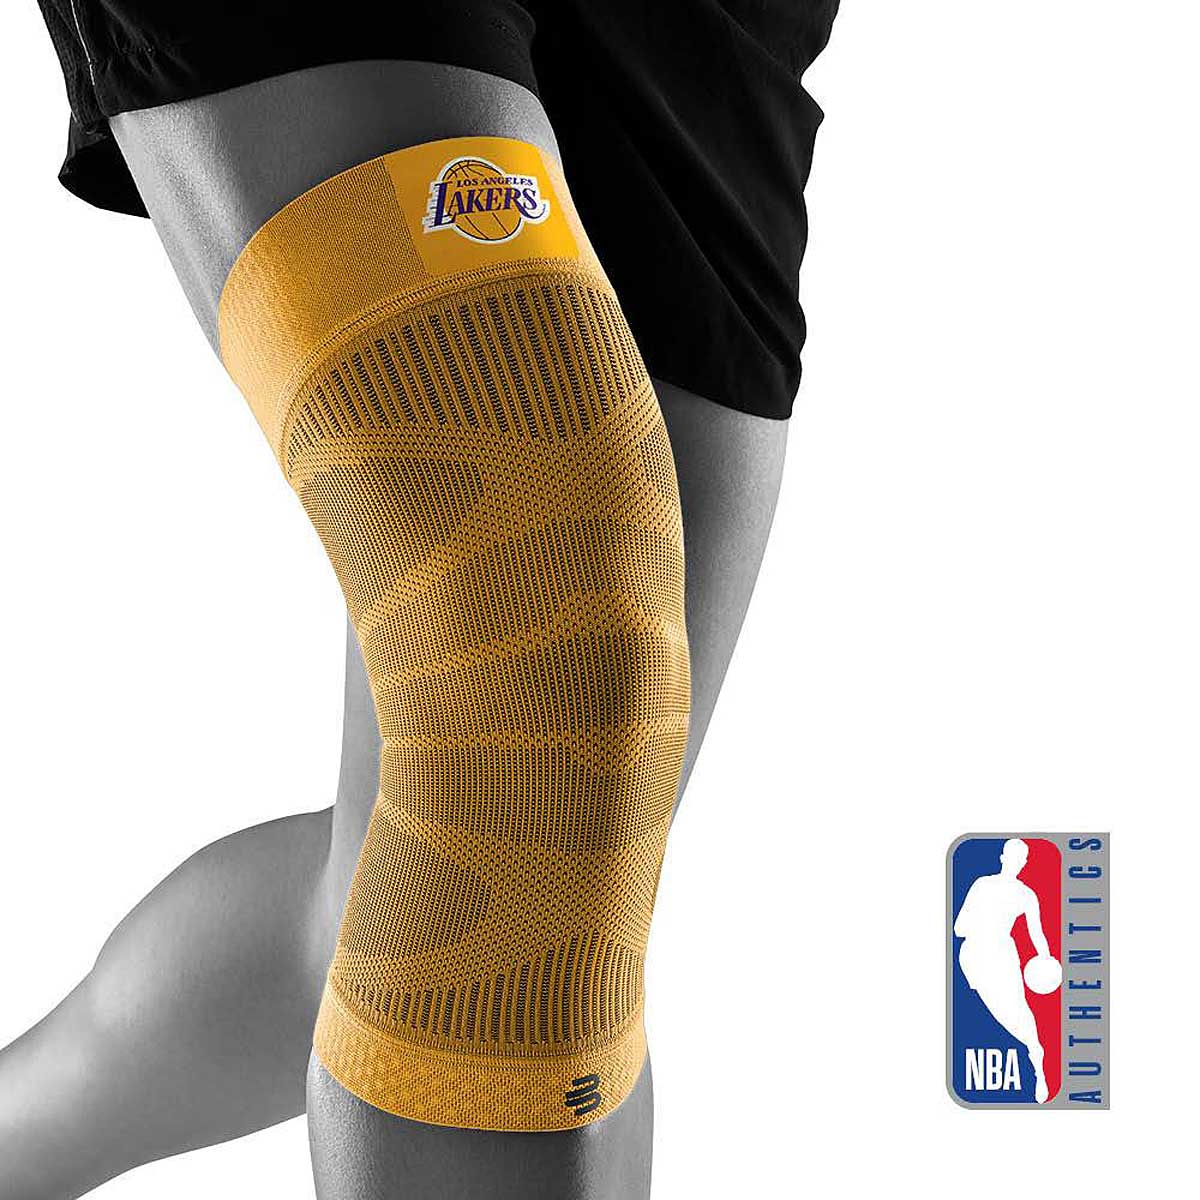 Bauerfeind Nba Sports Compression Knee Support Los Angeles Lakers, Lakers Yellow